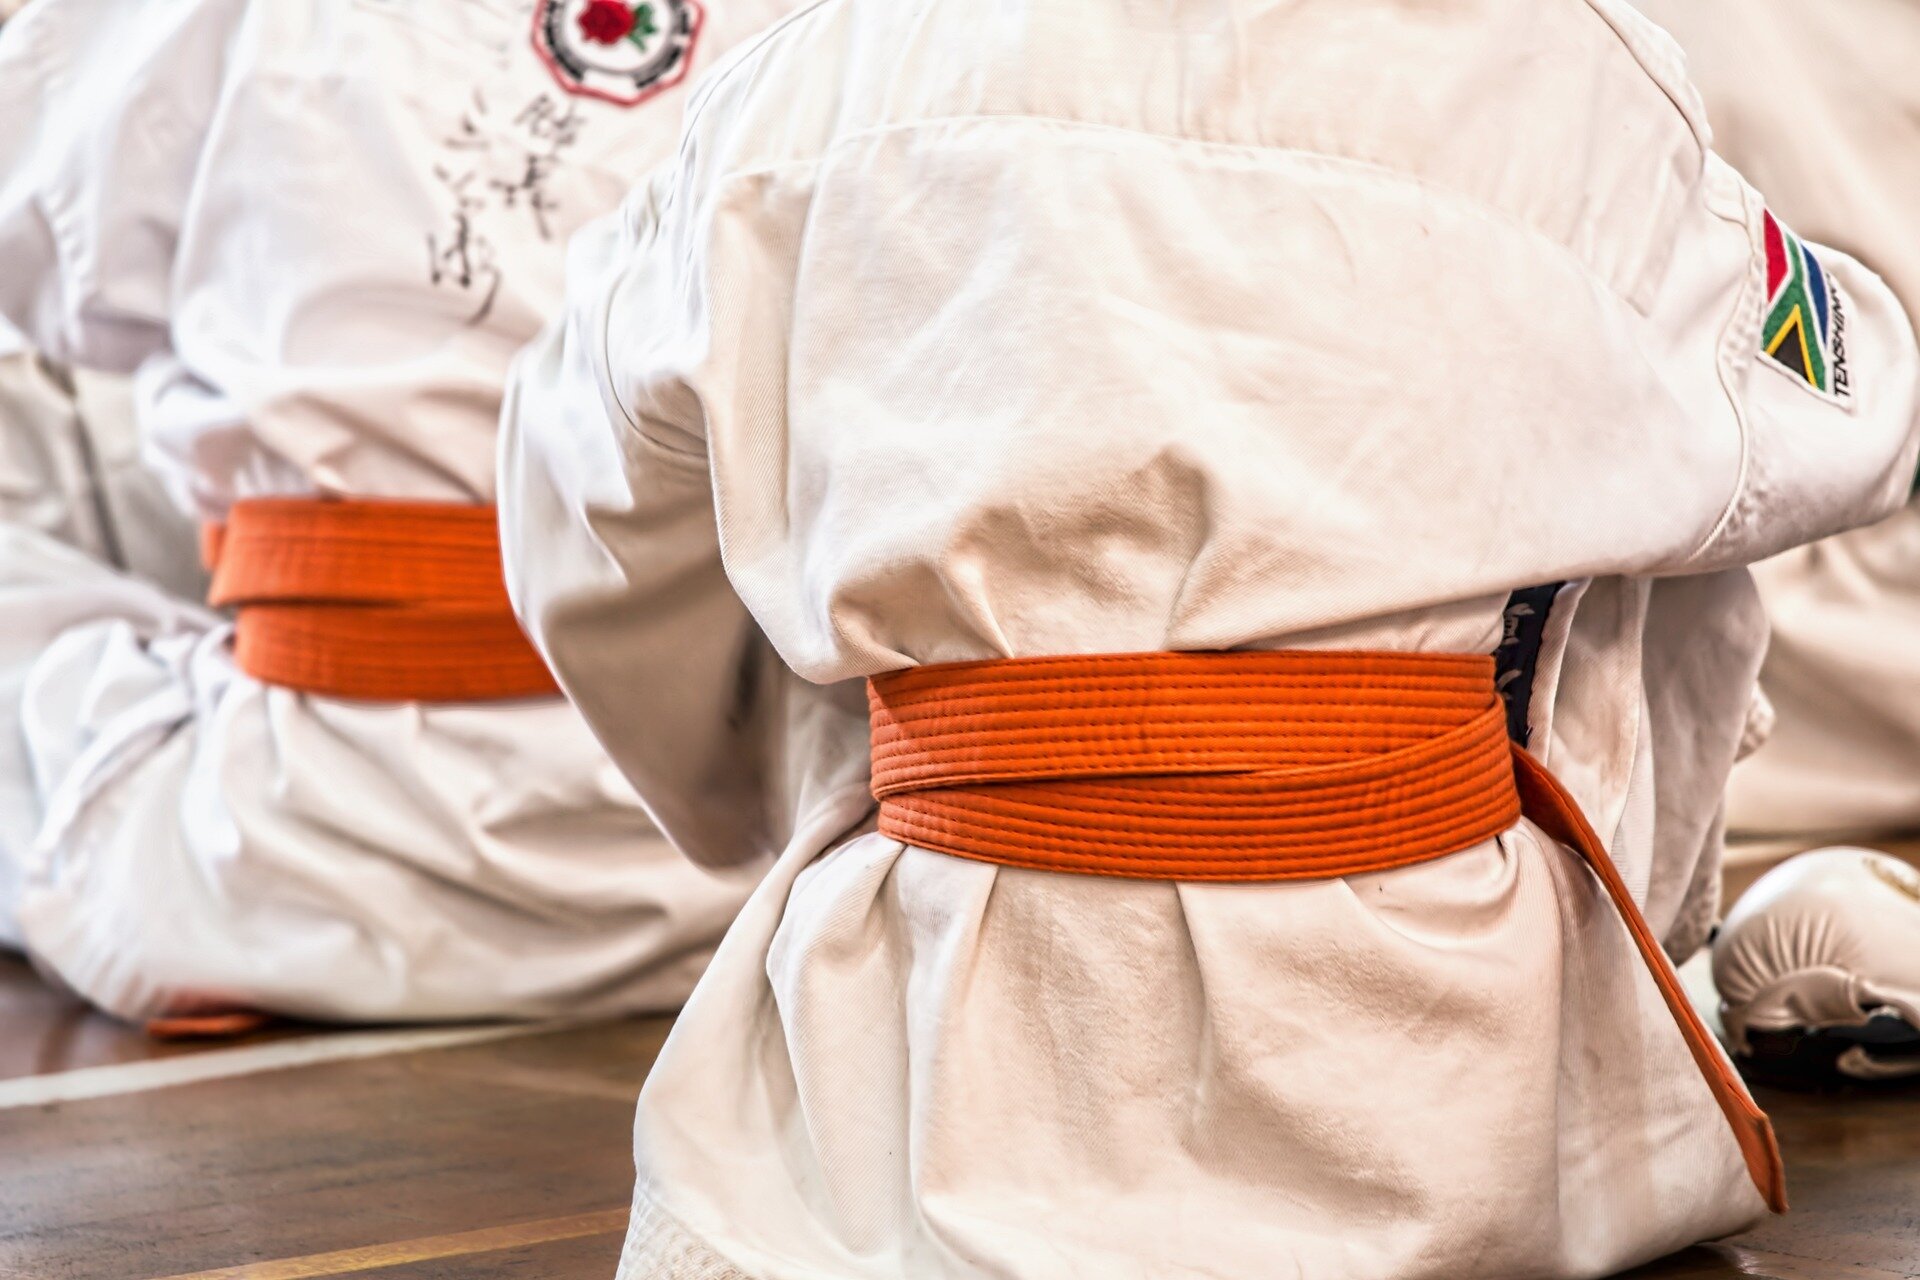 All the right moves in martial arts: Researchers develop system to quickly identify errors and improve form